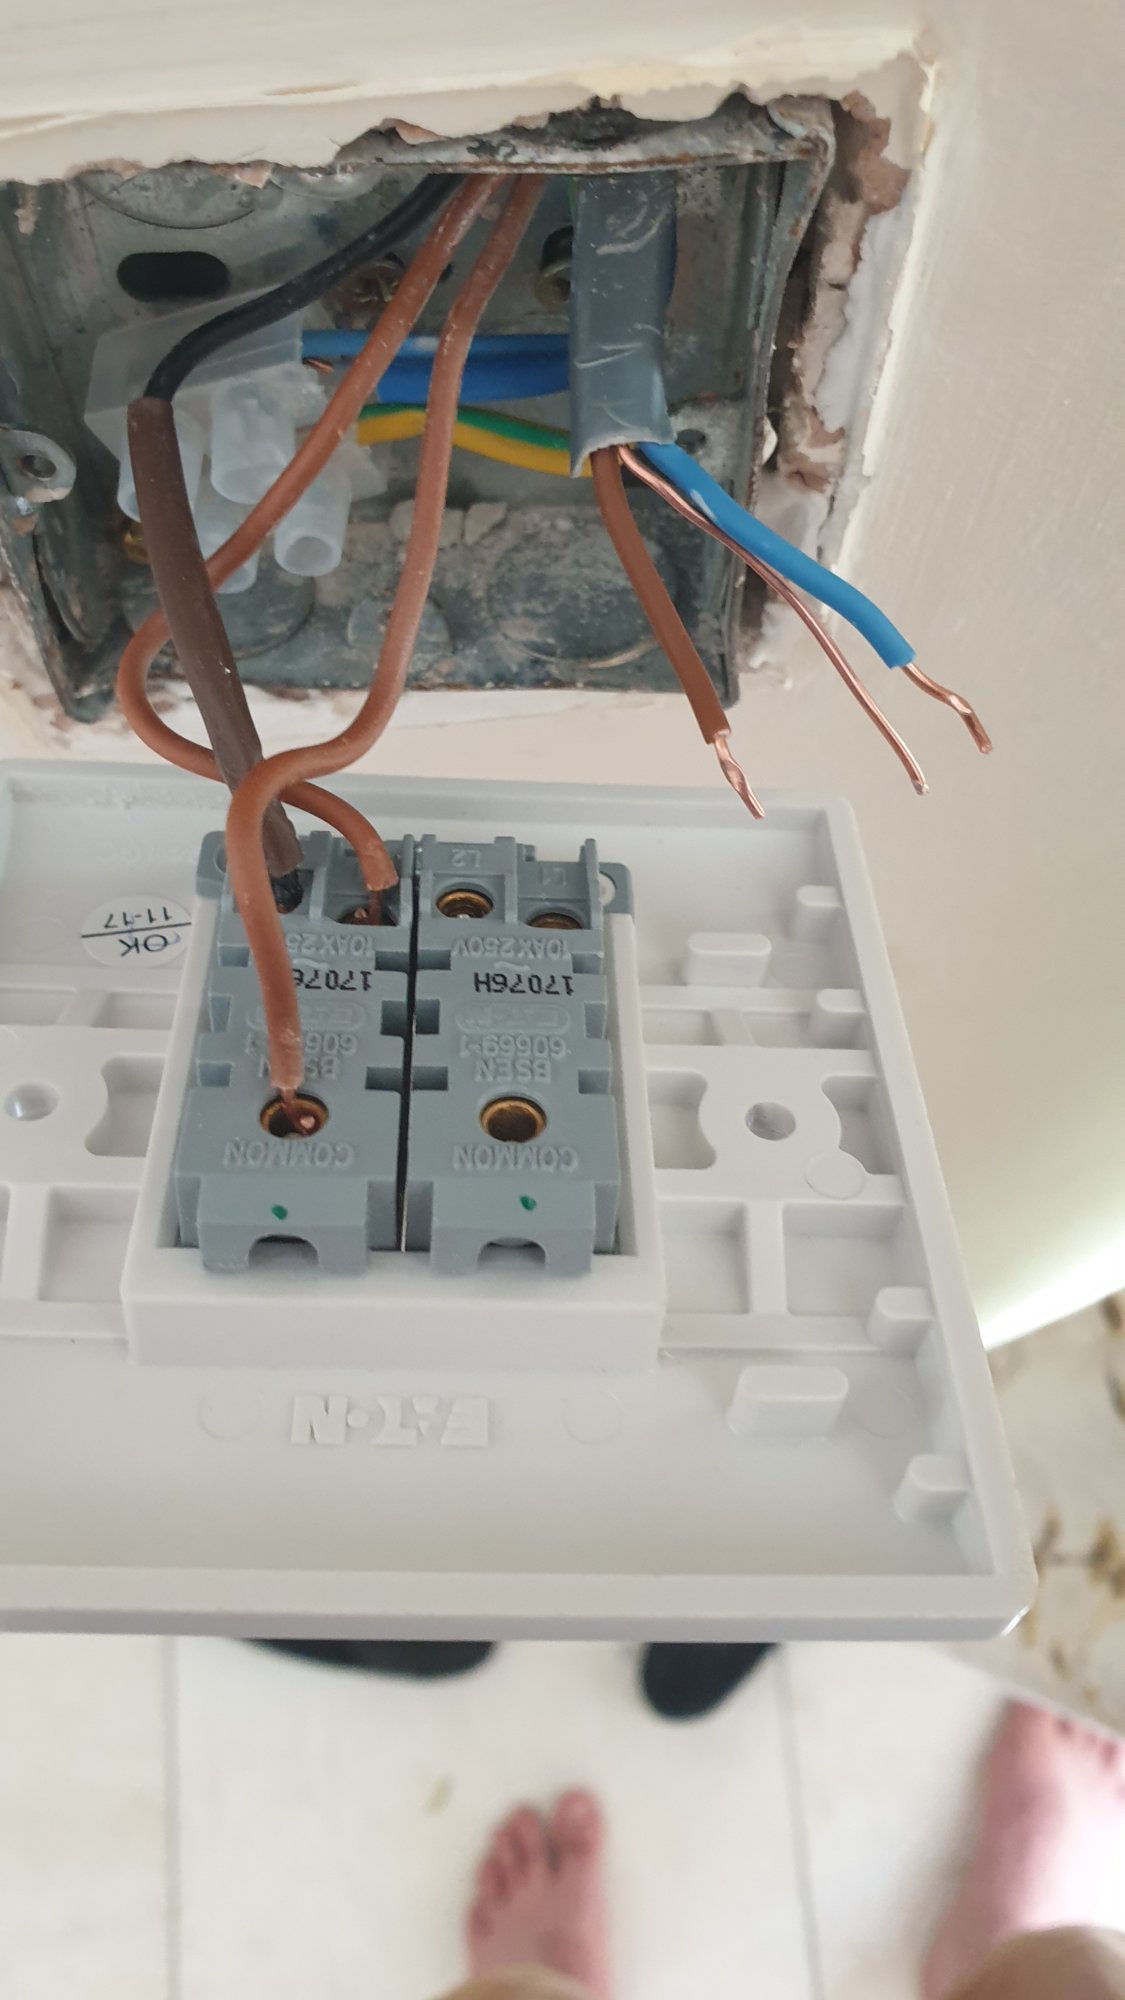 Wiring for a 2 gang light switch | DIYnot Forums